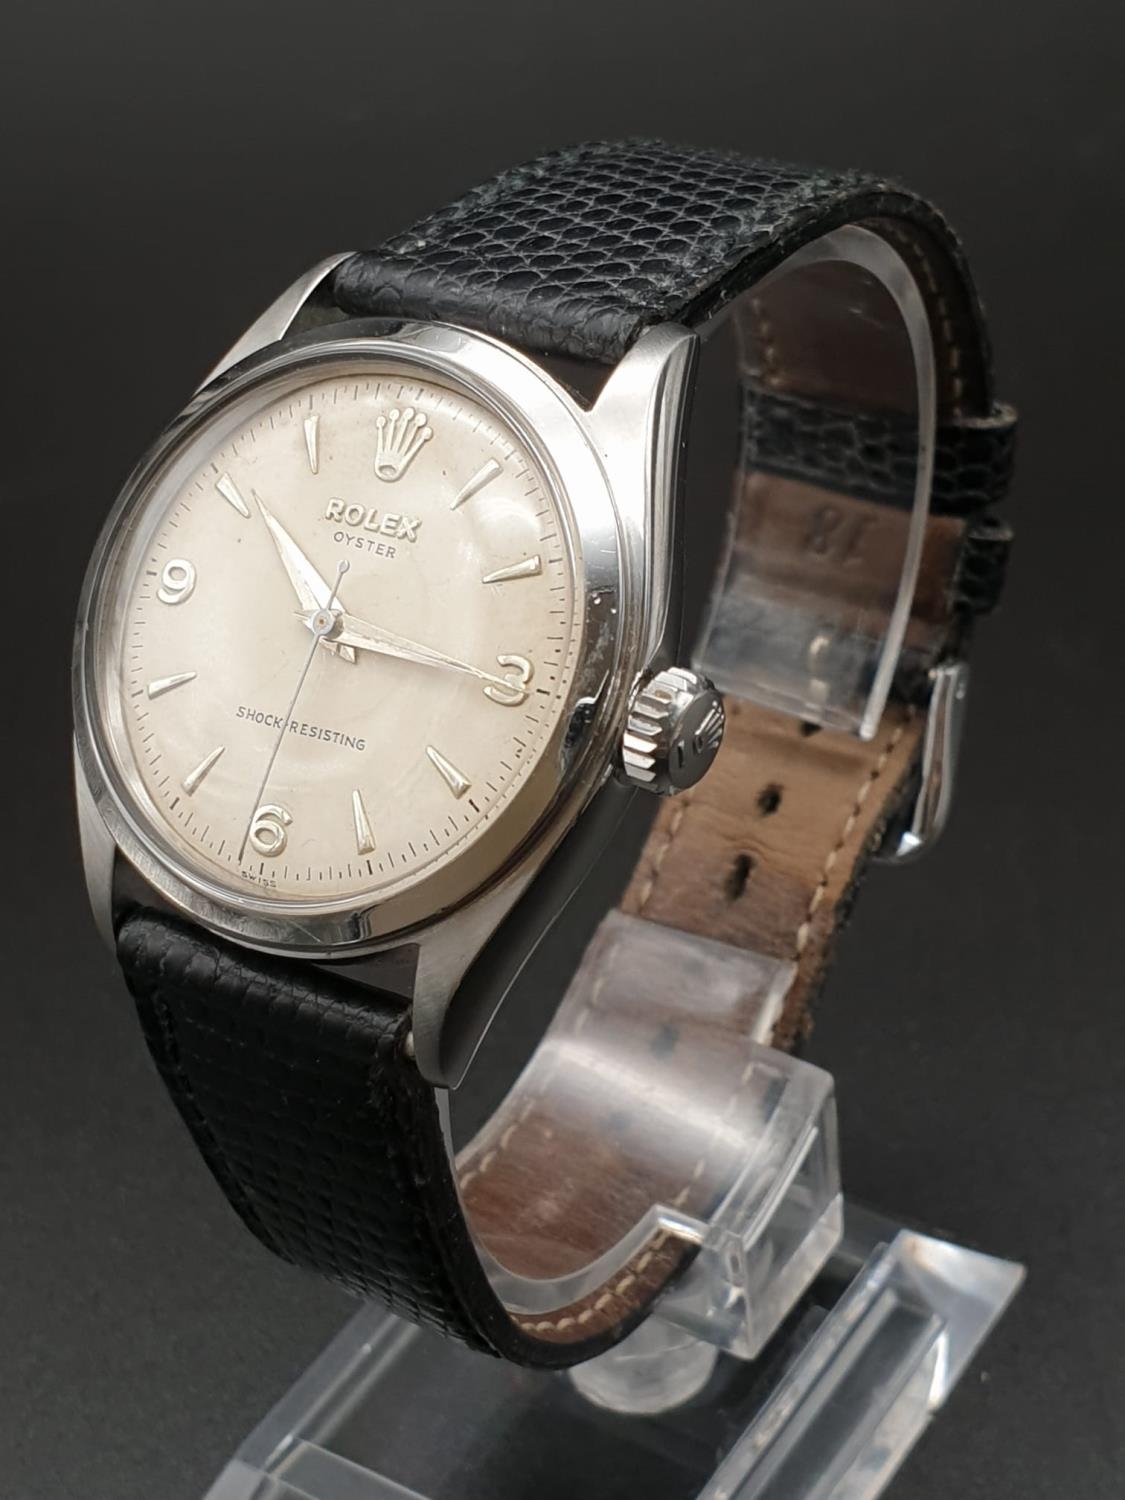 A VINTAGE ROLEX GENTS AUTOMATIC STAINLESS STEEL WATCH WITH A KLARLUND LEATHER STRAP 34MM FWO - Image 2 of 11